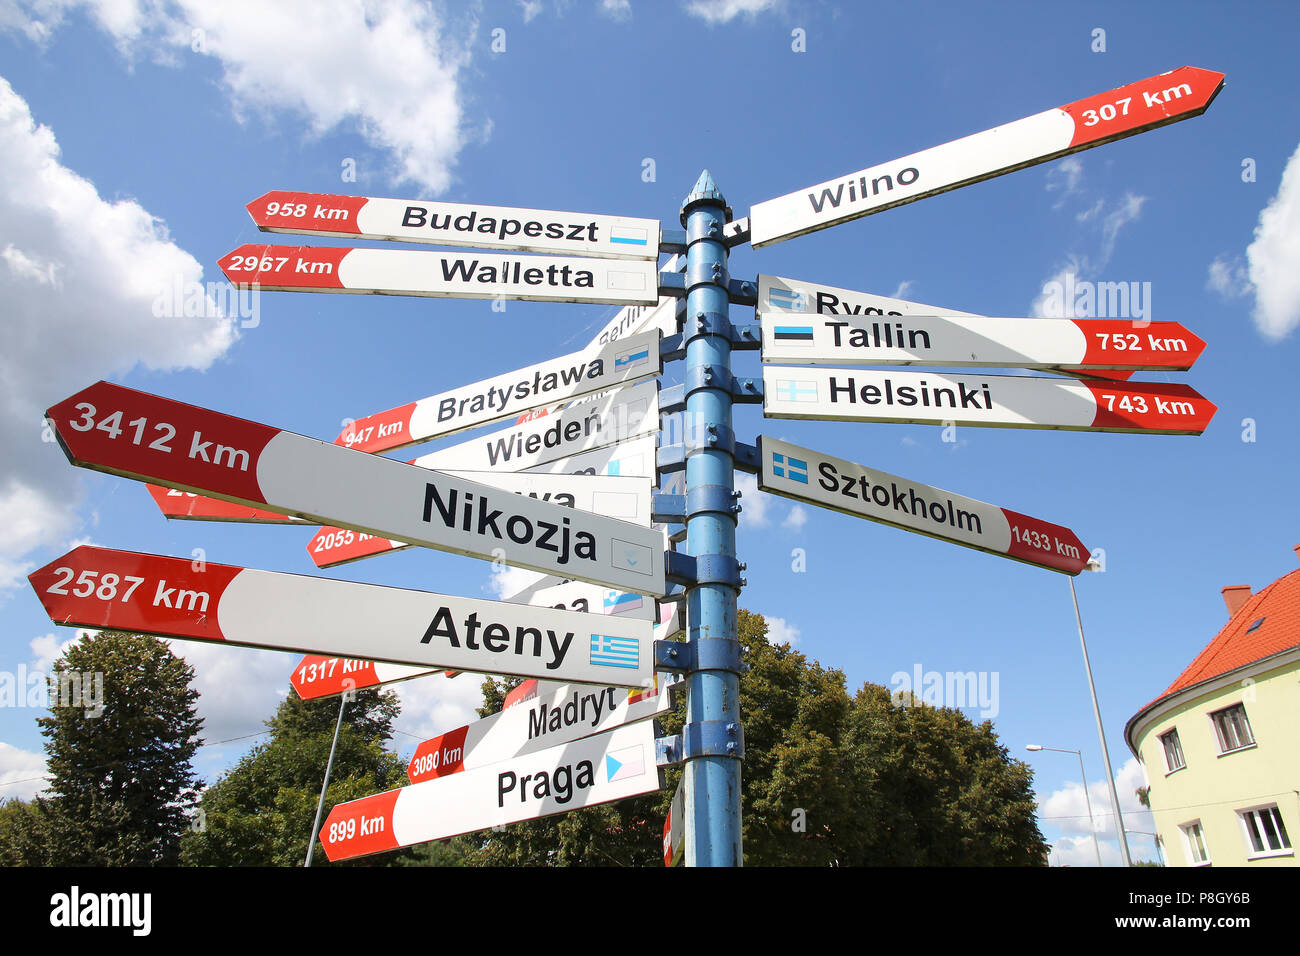 International direction signs to capital cities in Europe. The city names are in Polish. Stock Photo